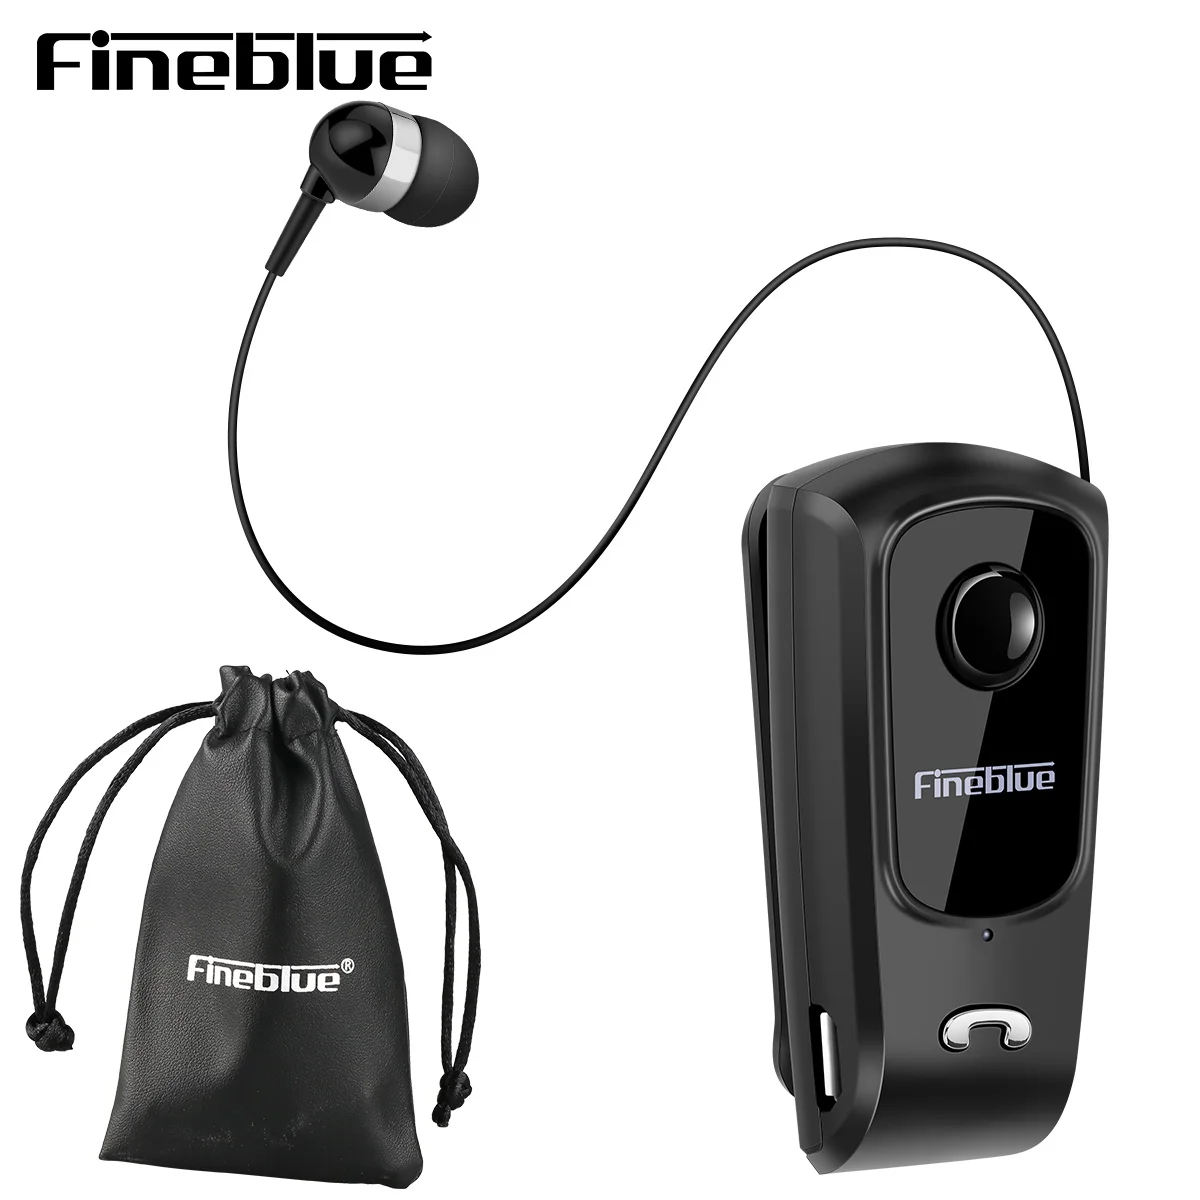 

HOT Fineblue F920 Wireless Bluetooth business Earphone Vibration Alert Wear Stereo Sport Auriculares With Bag